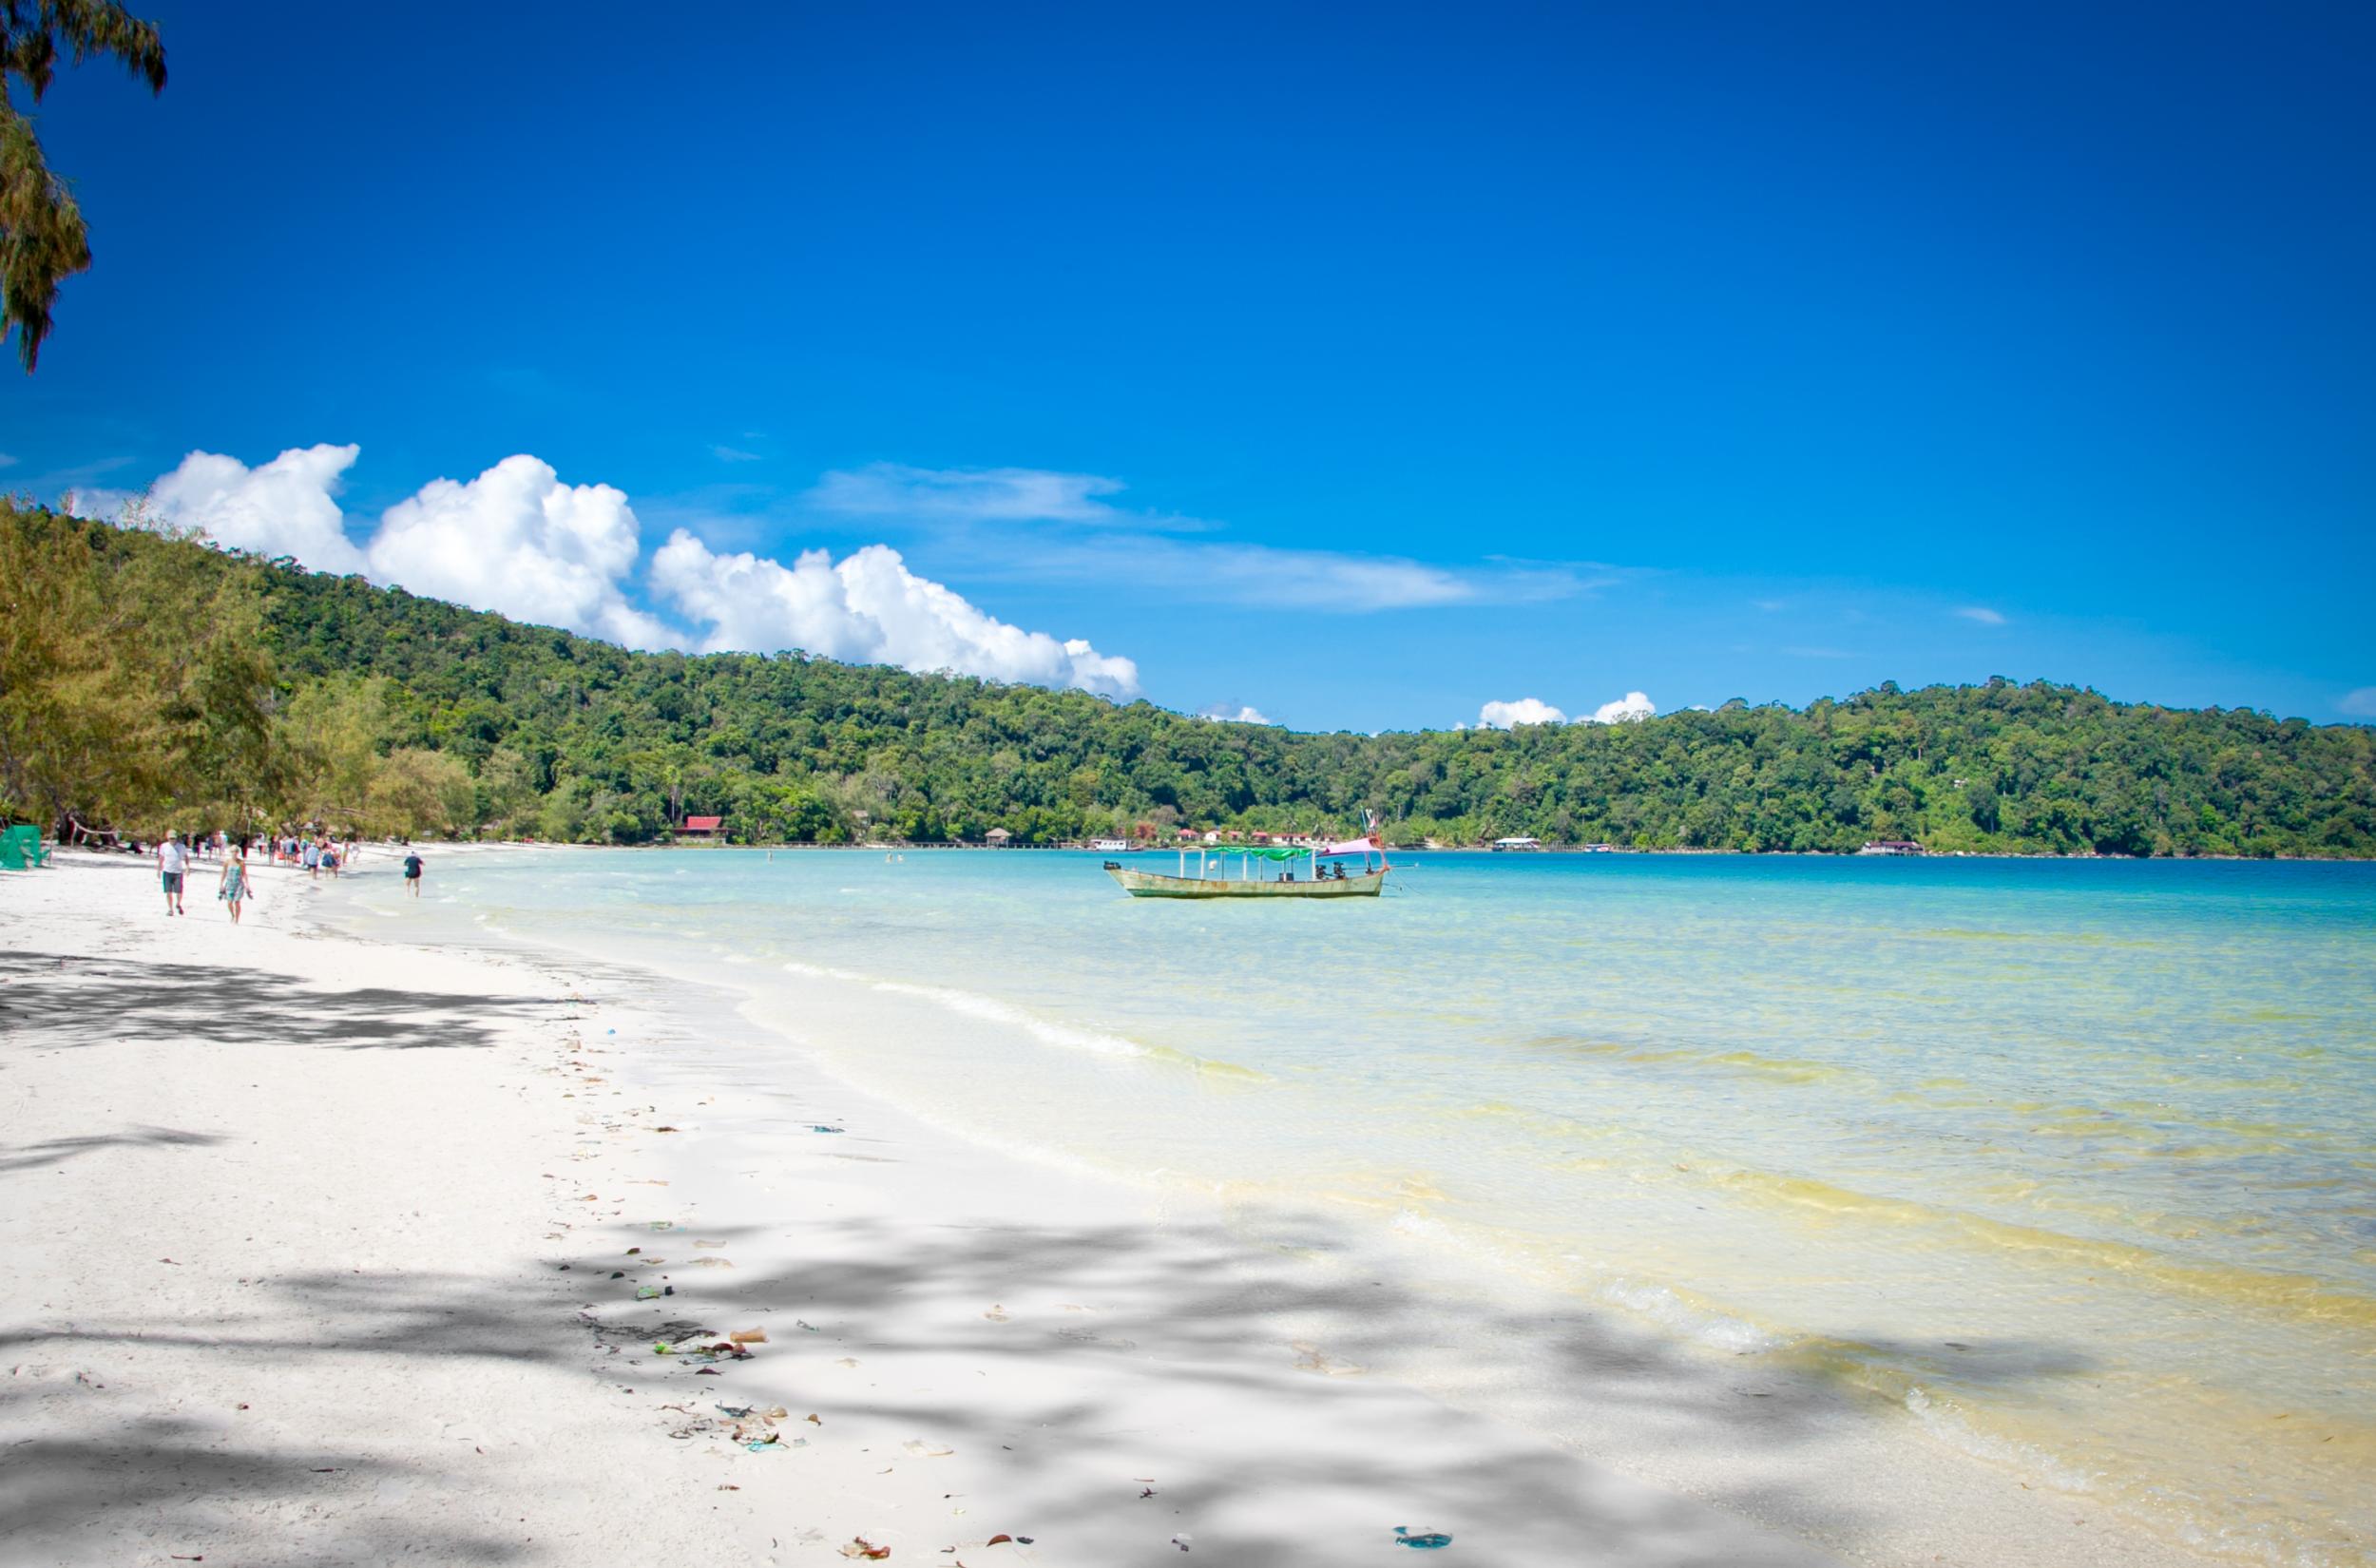 Koh Rong is an island off Cambodia’s coast